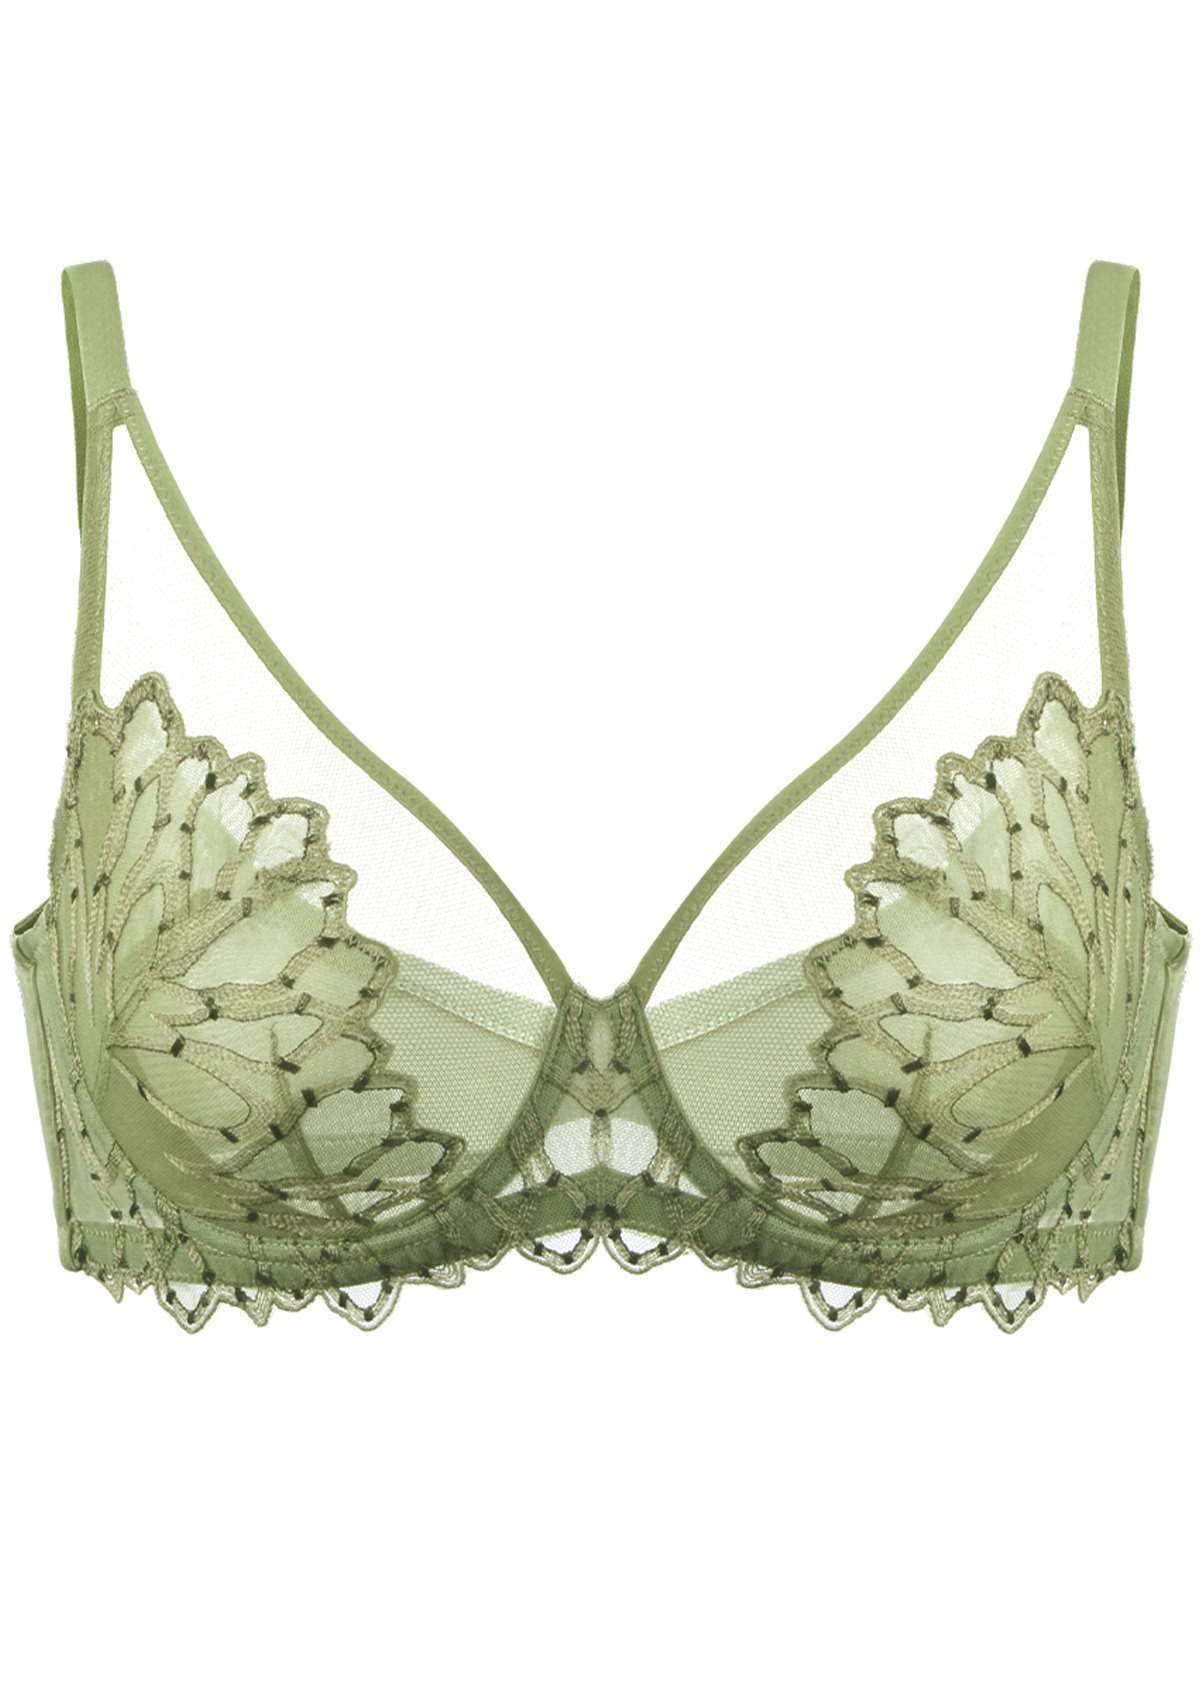 HSIA Chrysanthemum Floral Embroidered Bra: Lace Sheer Unpadded Bra - Crystal Blue / 32 / C